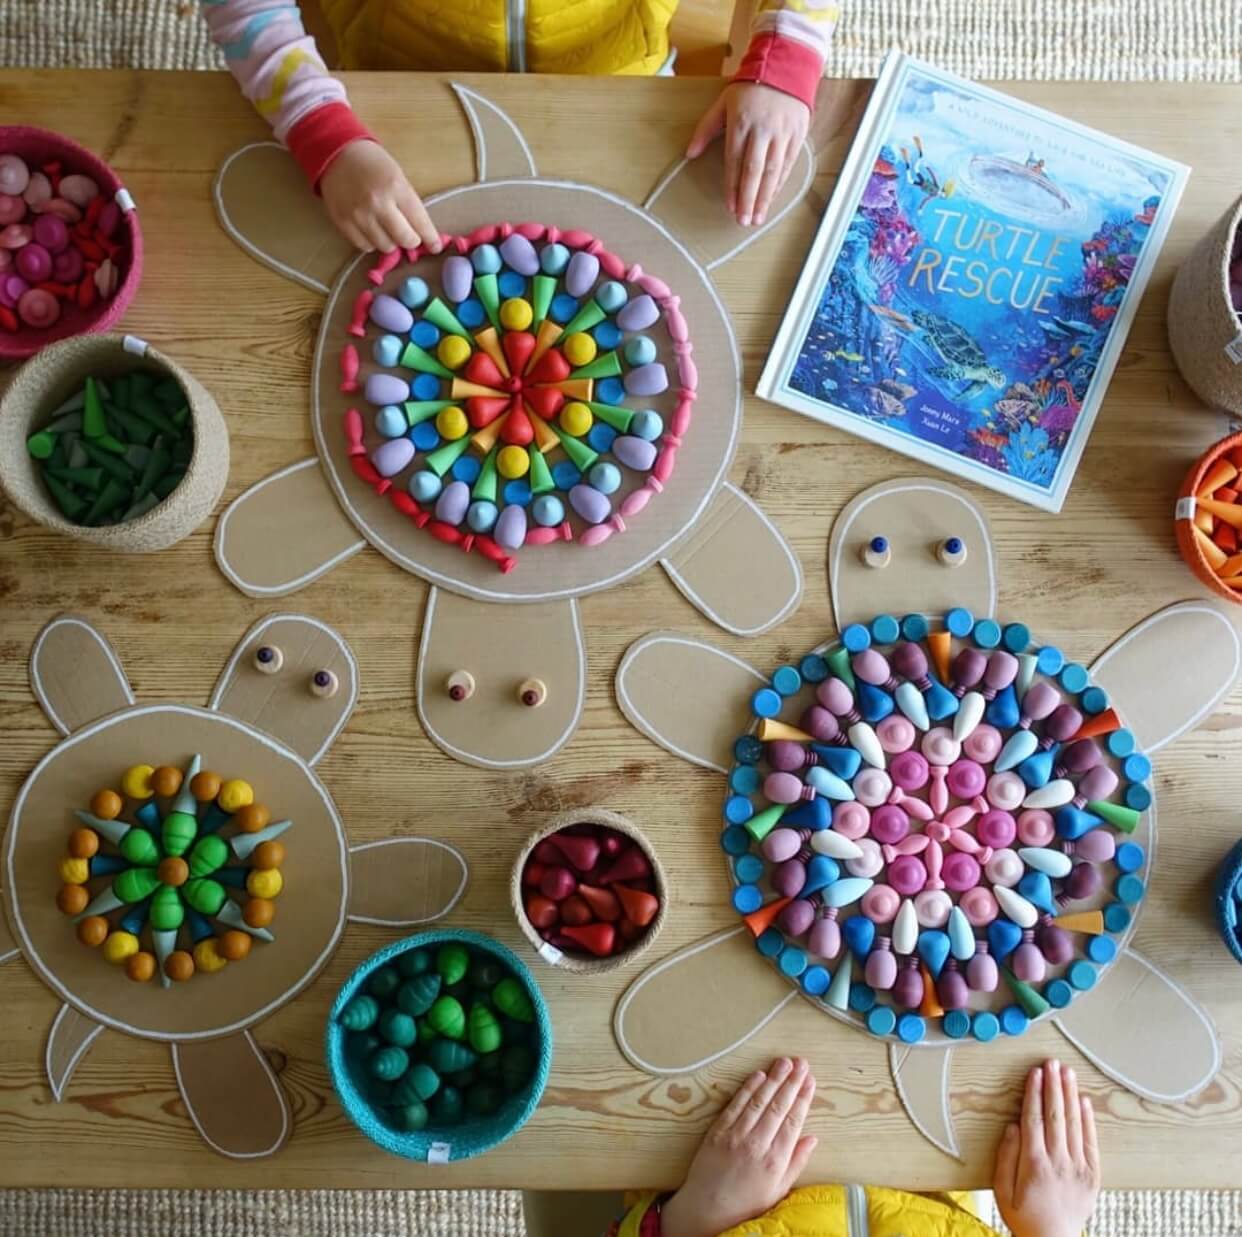 Activity 20: Loose Parts Play from Cardboard